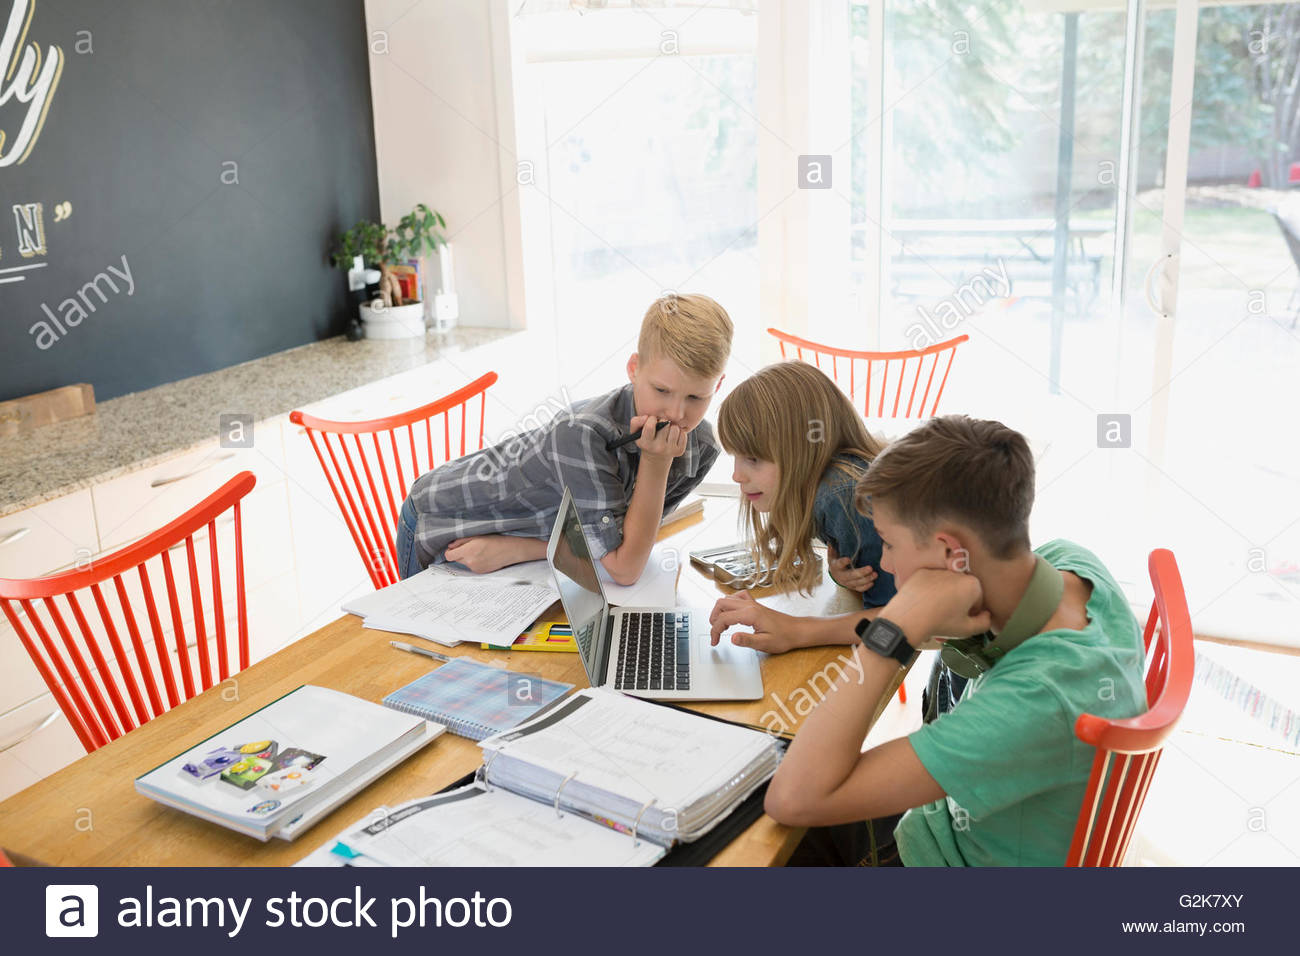 Brothers and sister doing homework at laptop at dining table Stock Photo